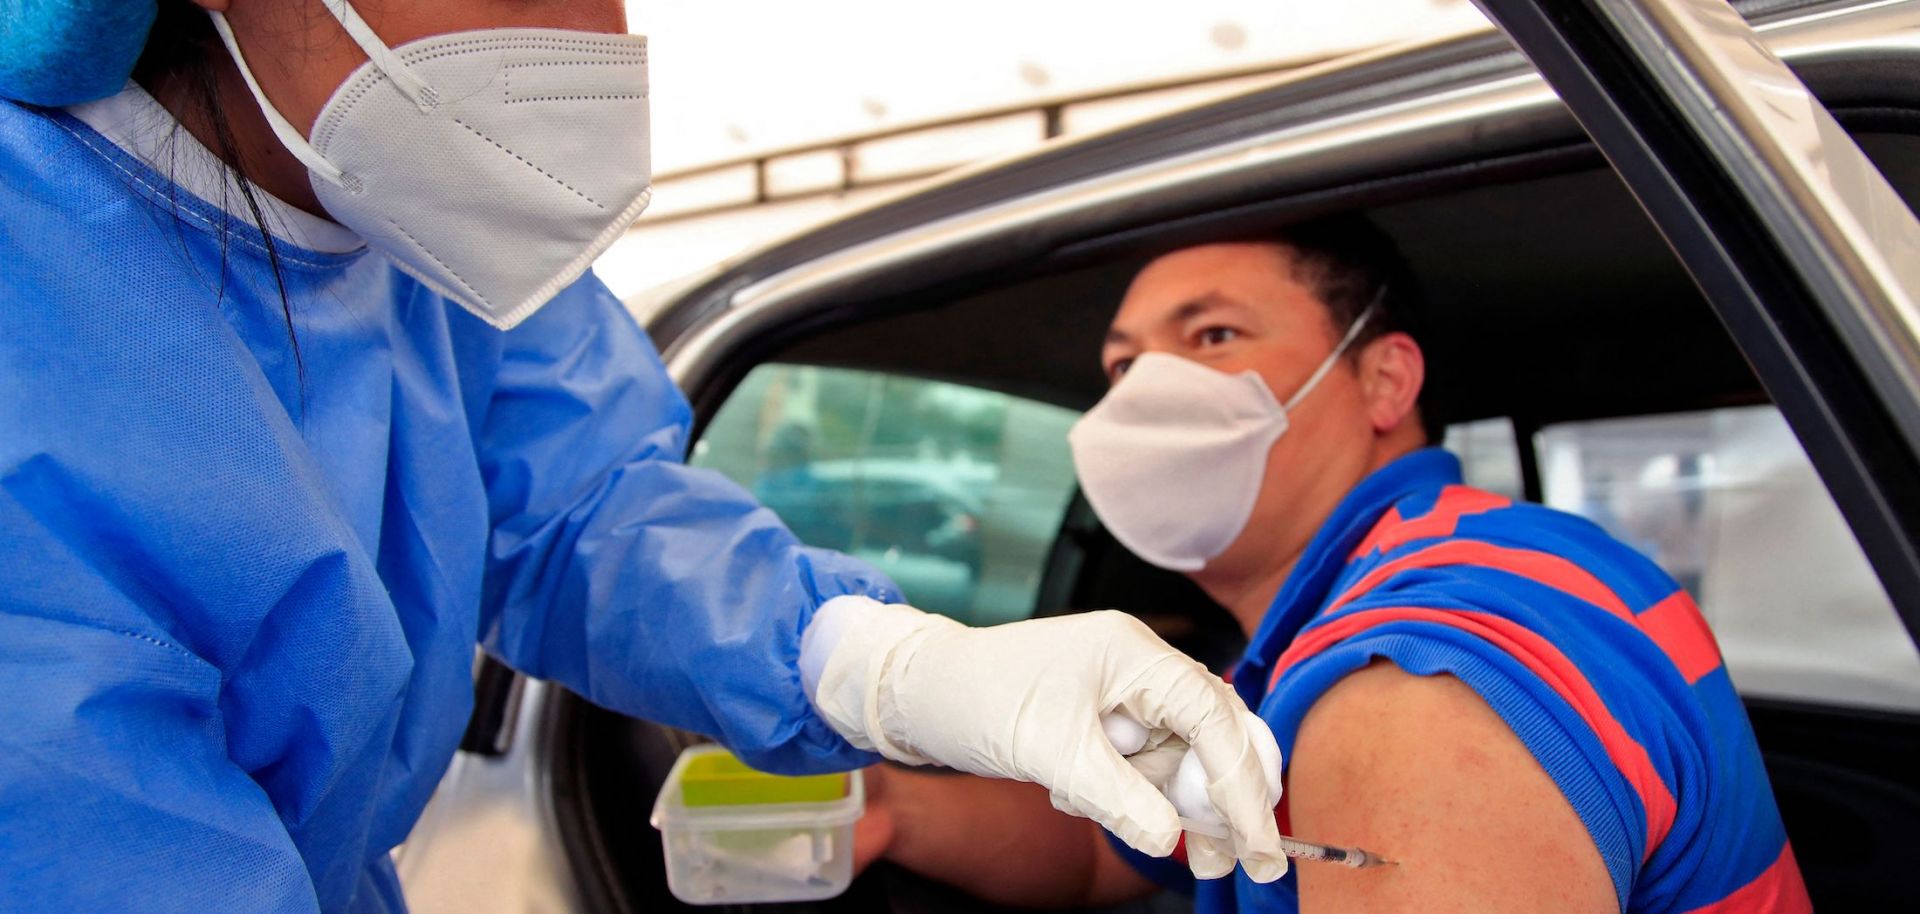 A man receives a dose of a COVID-19 vaccine at a drive-through distribution site in Bogota, Colombia, on April 11, 2021.